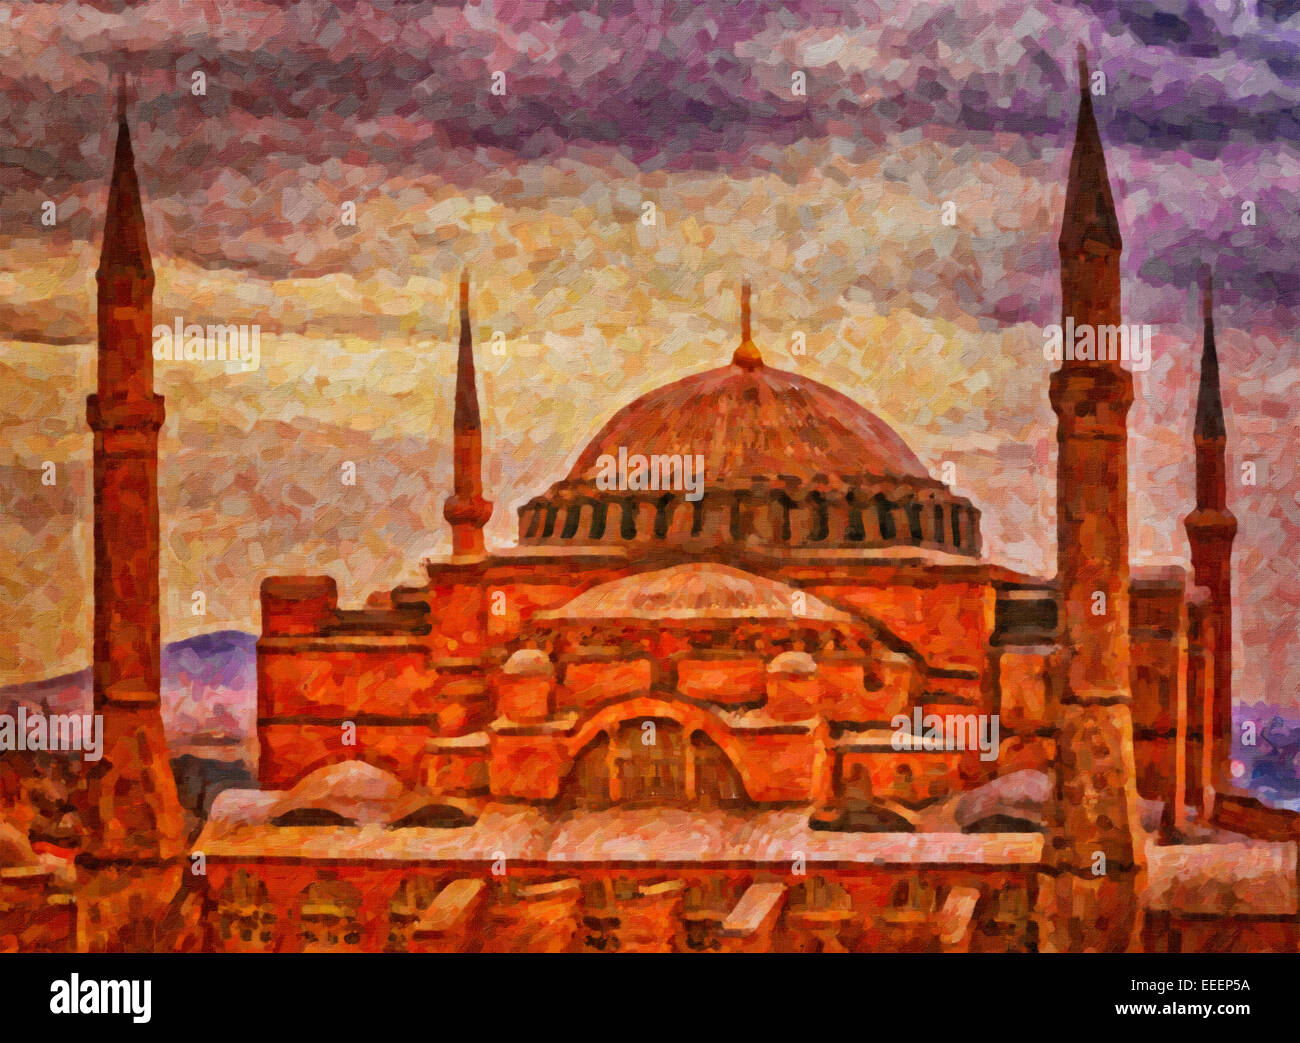 A digital painting of the impressive hagia sophia mosque situated in the turkish city of istanbul. Stock Photo